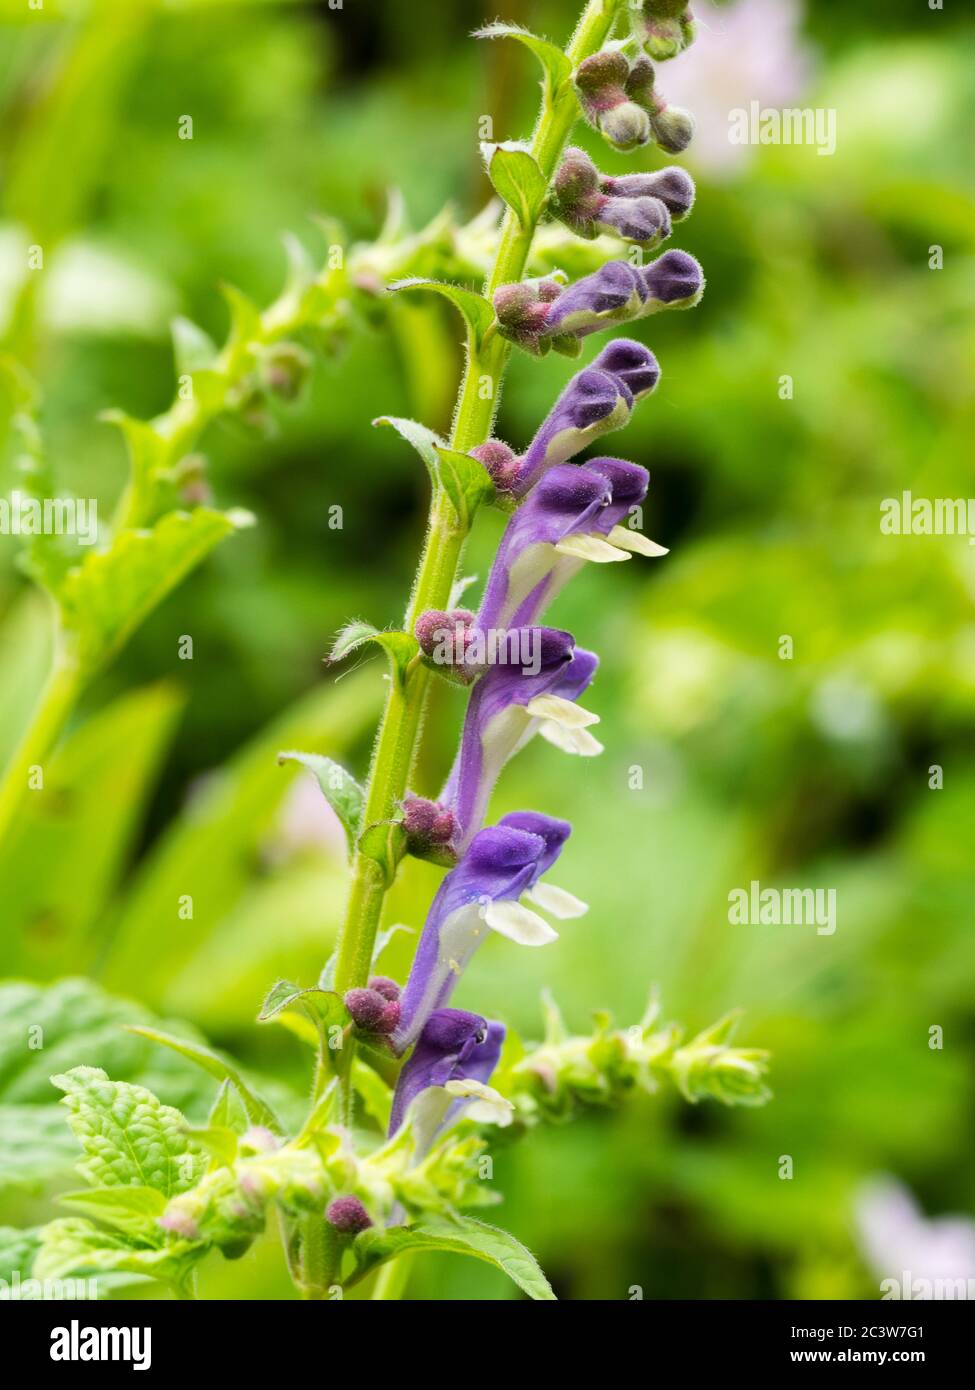 Spike of hooded purple and white summer flowers of the hardy perennial Somerset skullcap, Scutellaria altissima Stock Photo